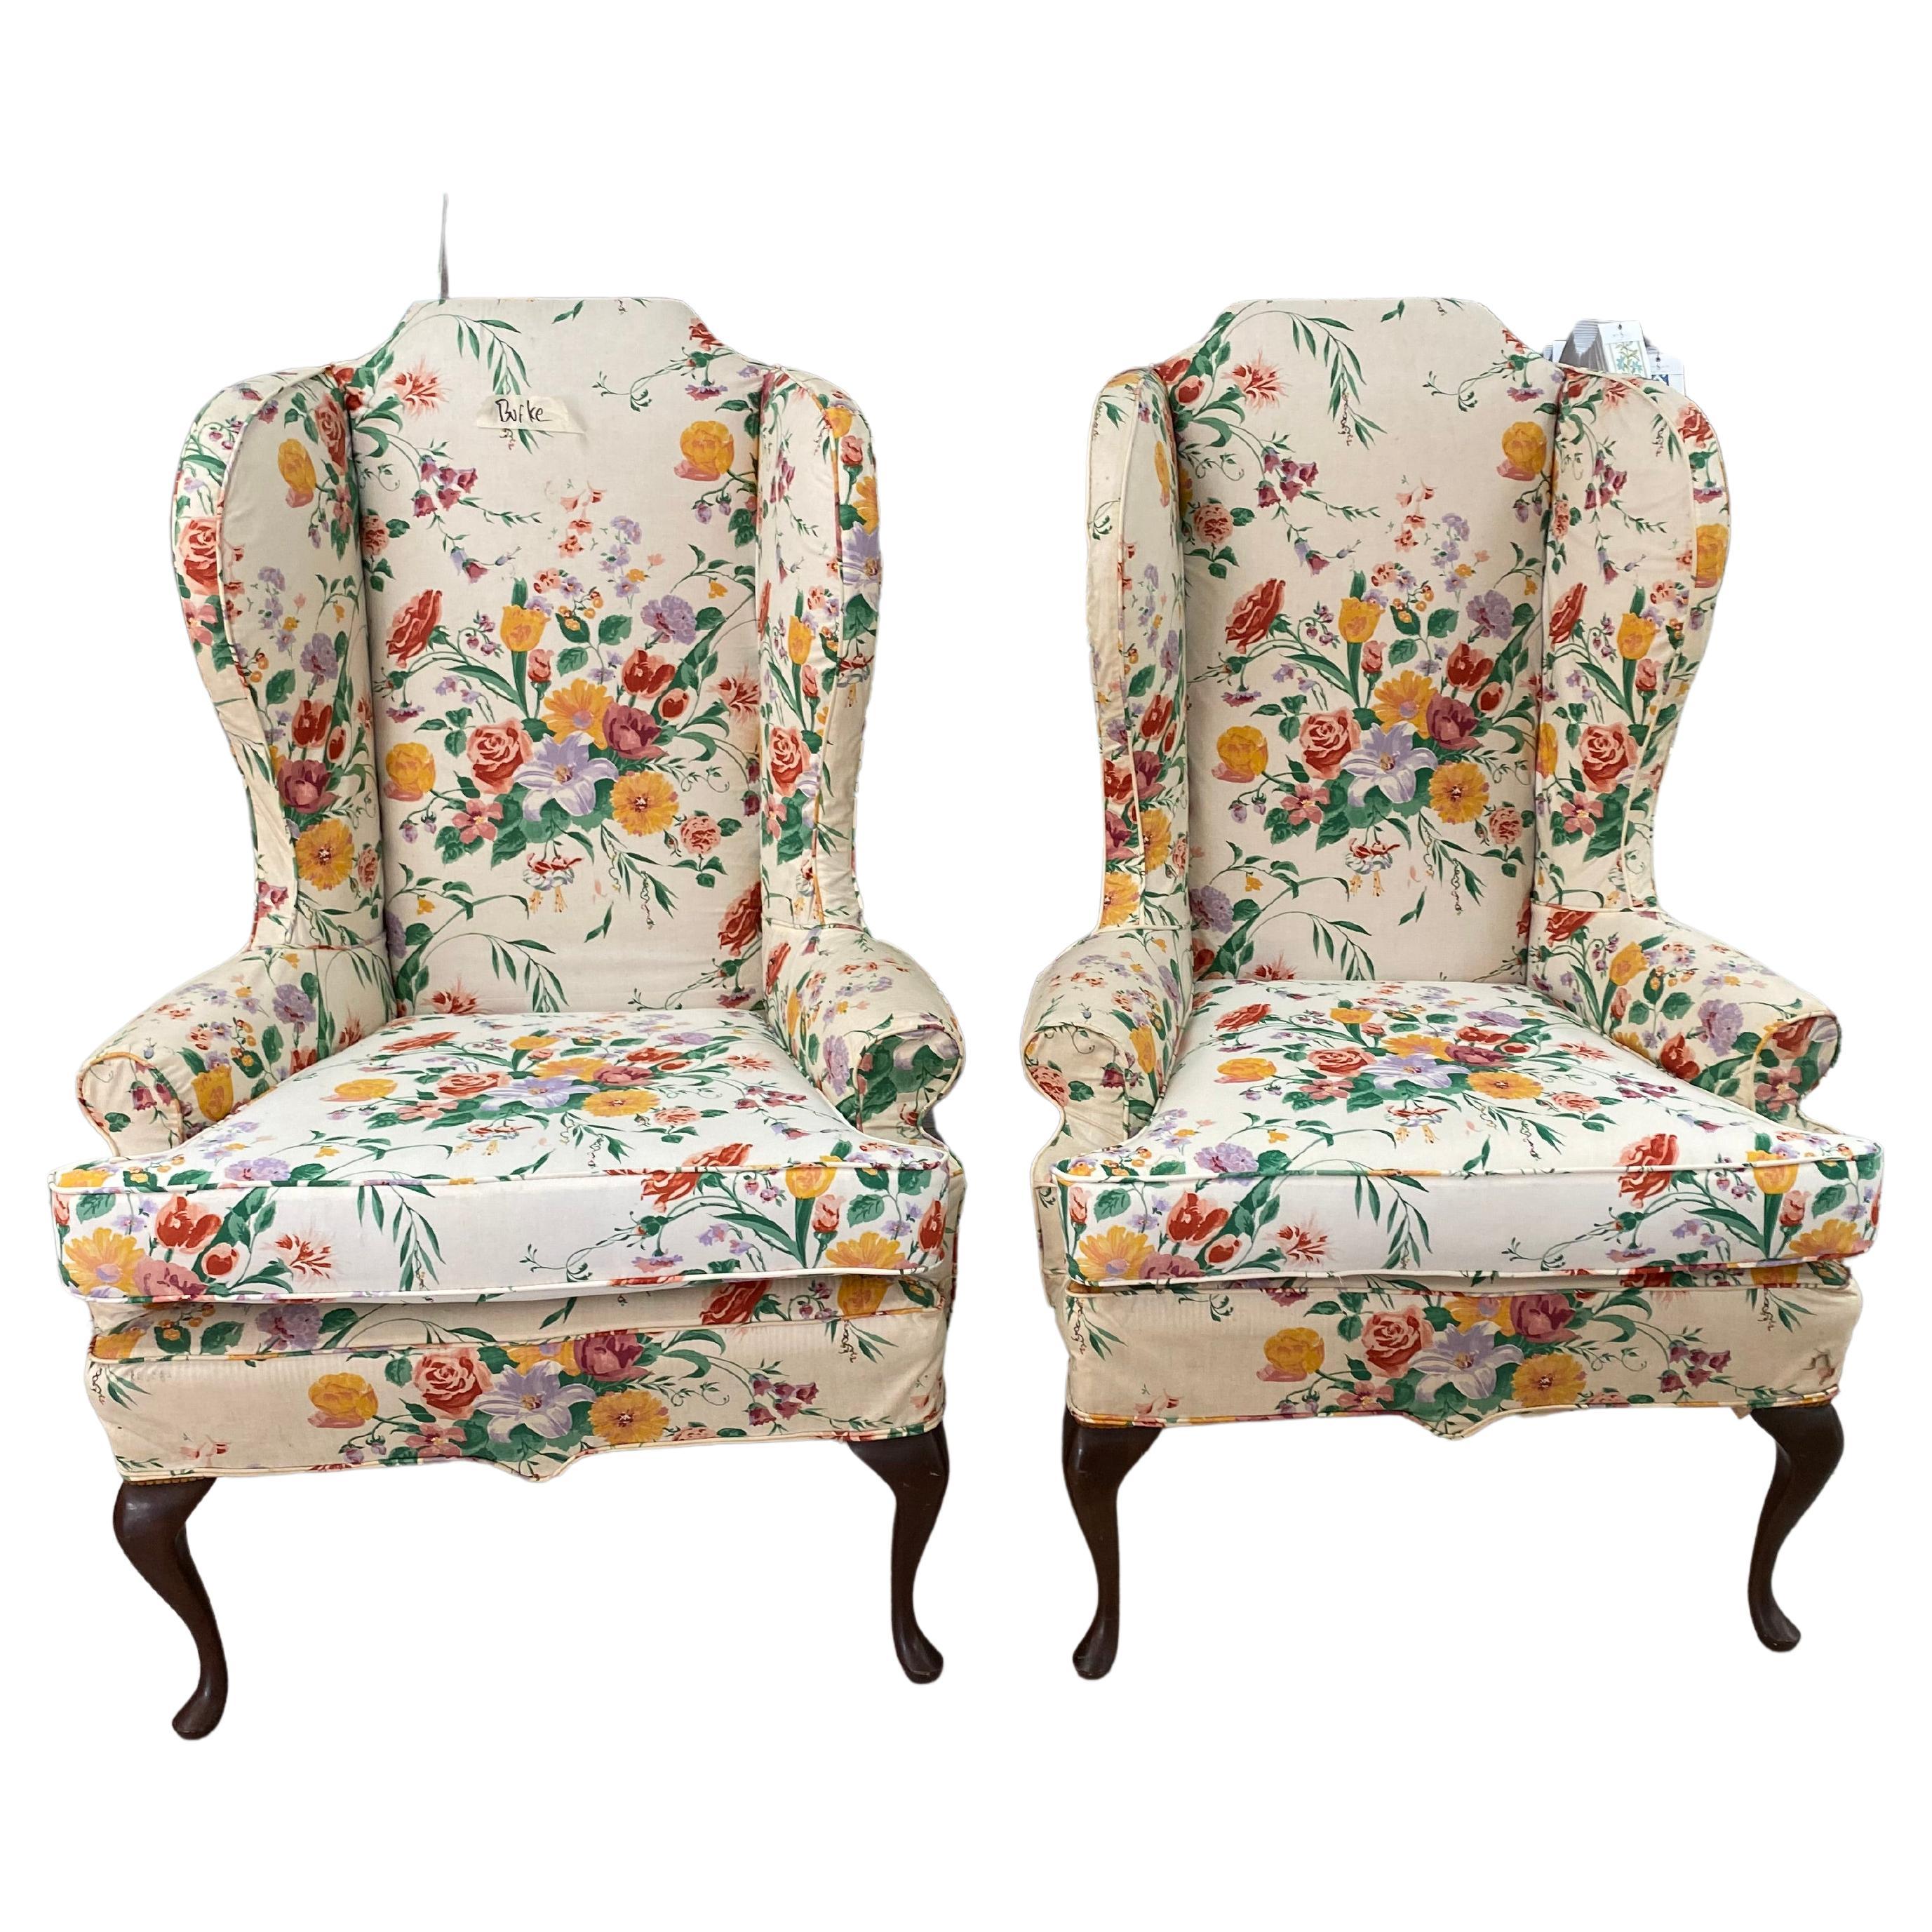 Sportman Bijna dood vaas Par of English Queen Anne Style Wing Armchairs For Sale at 1stDibs